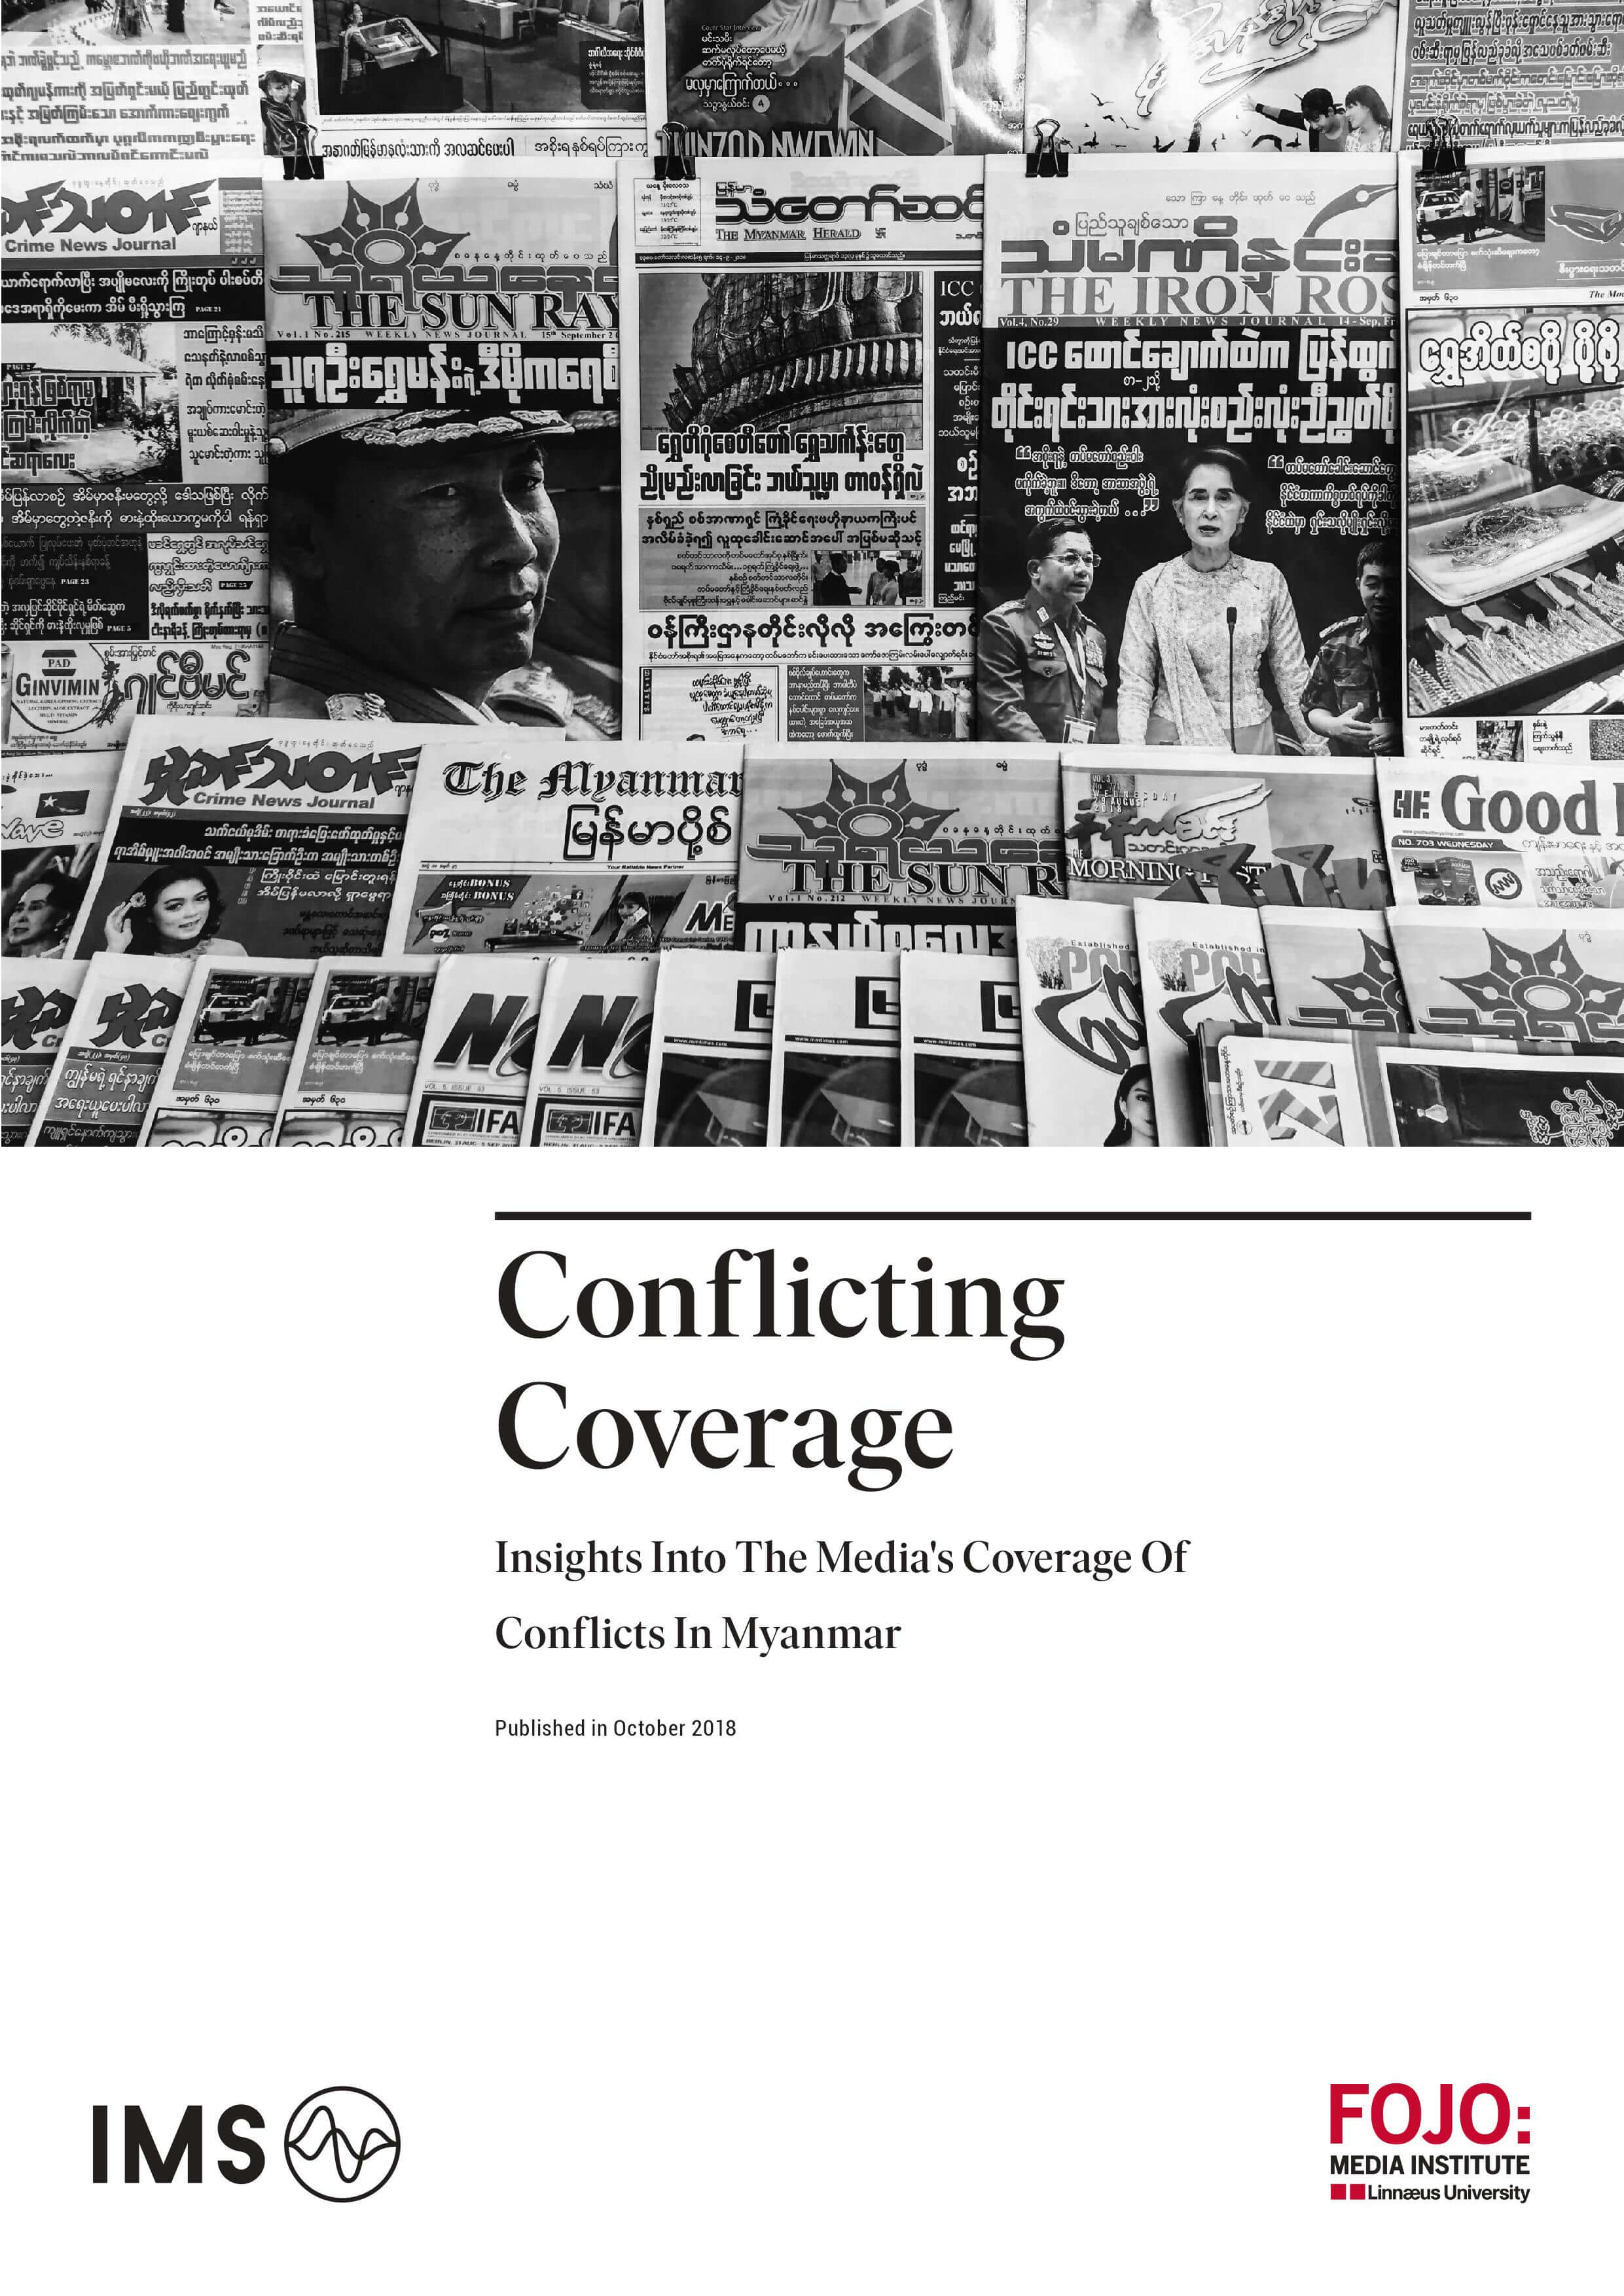 Conflicting coverage: Insights into the media's coverage of conflicts in Myanmar